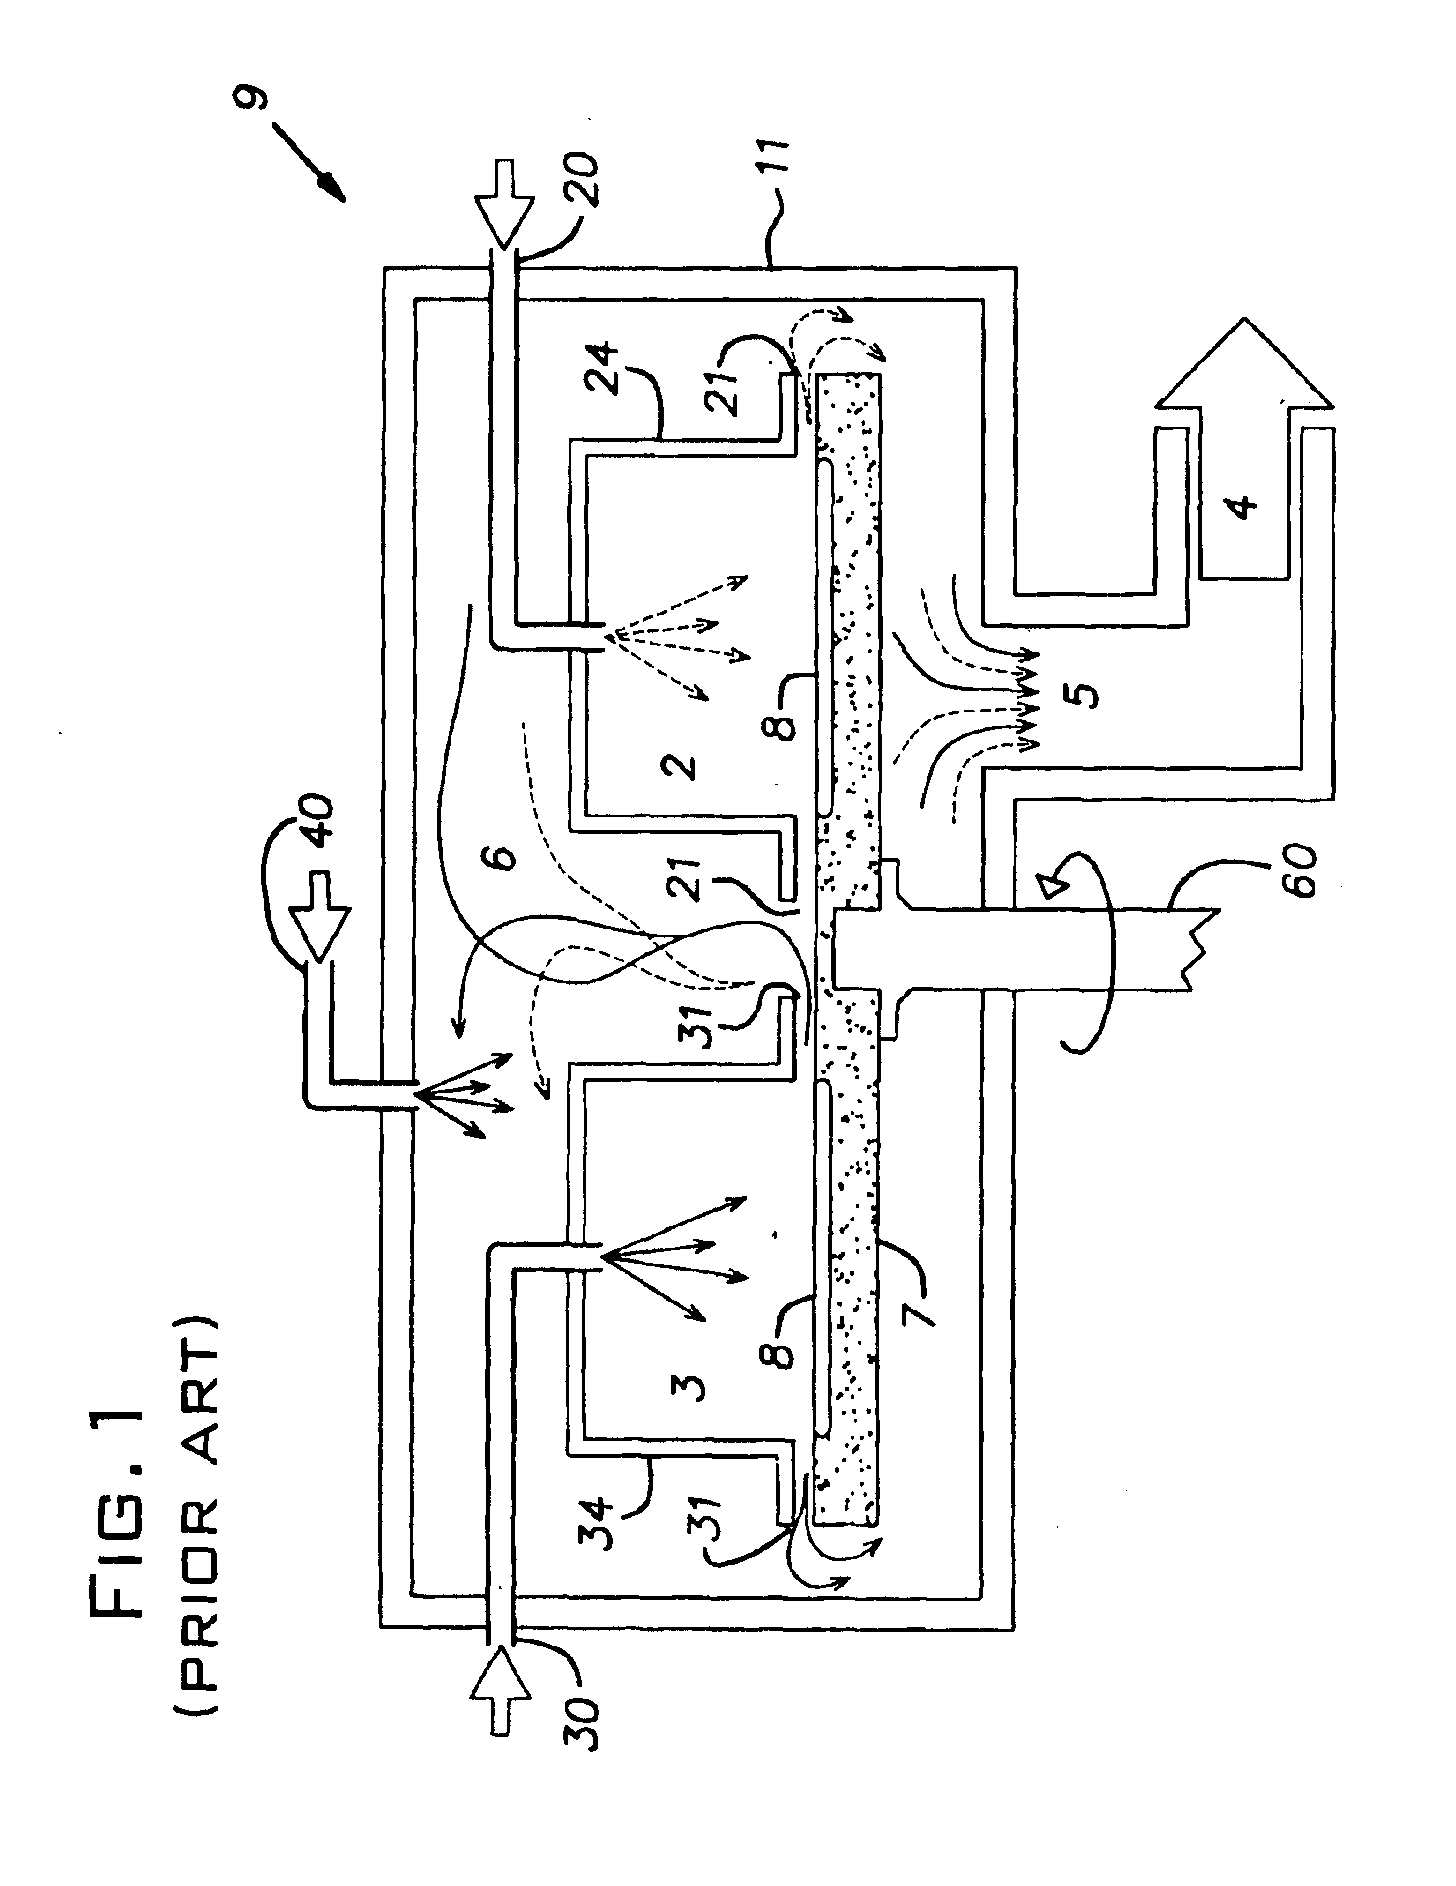 Method and apparatus for ALD on a rotary susceptor